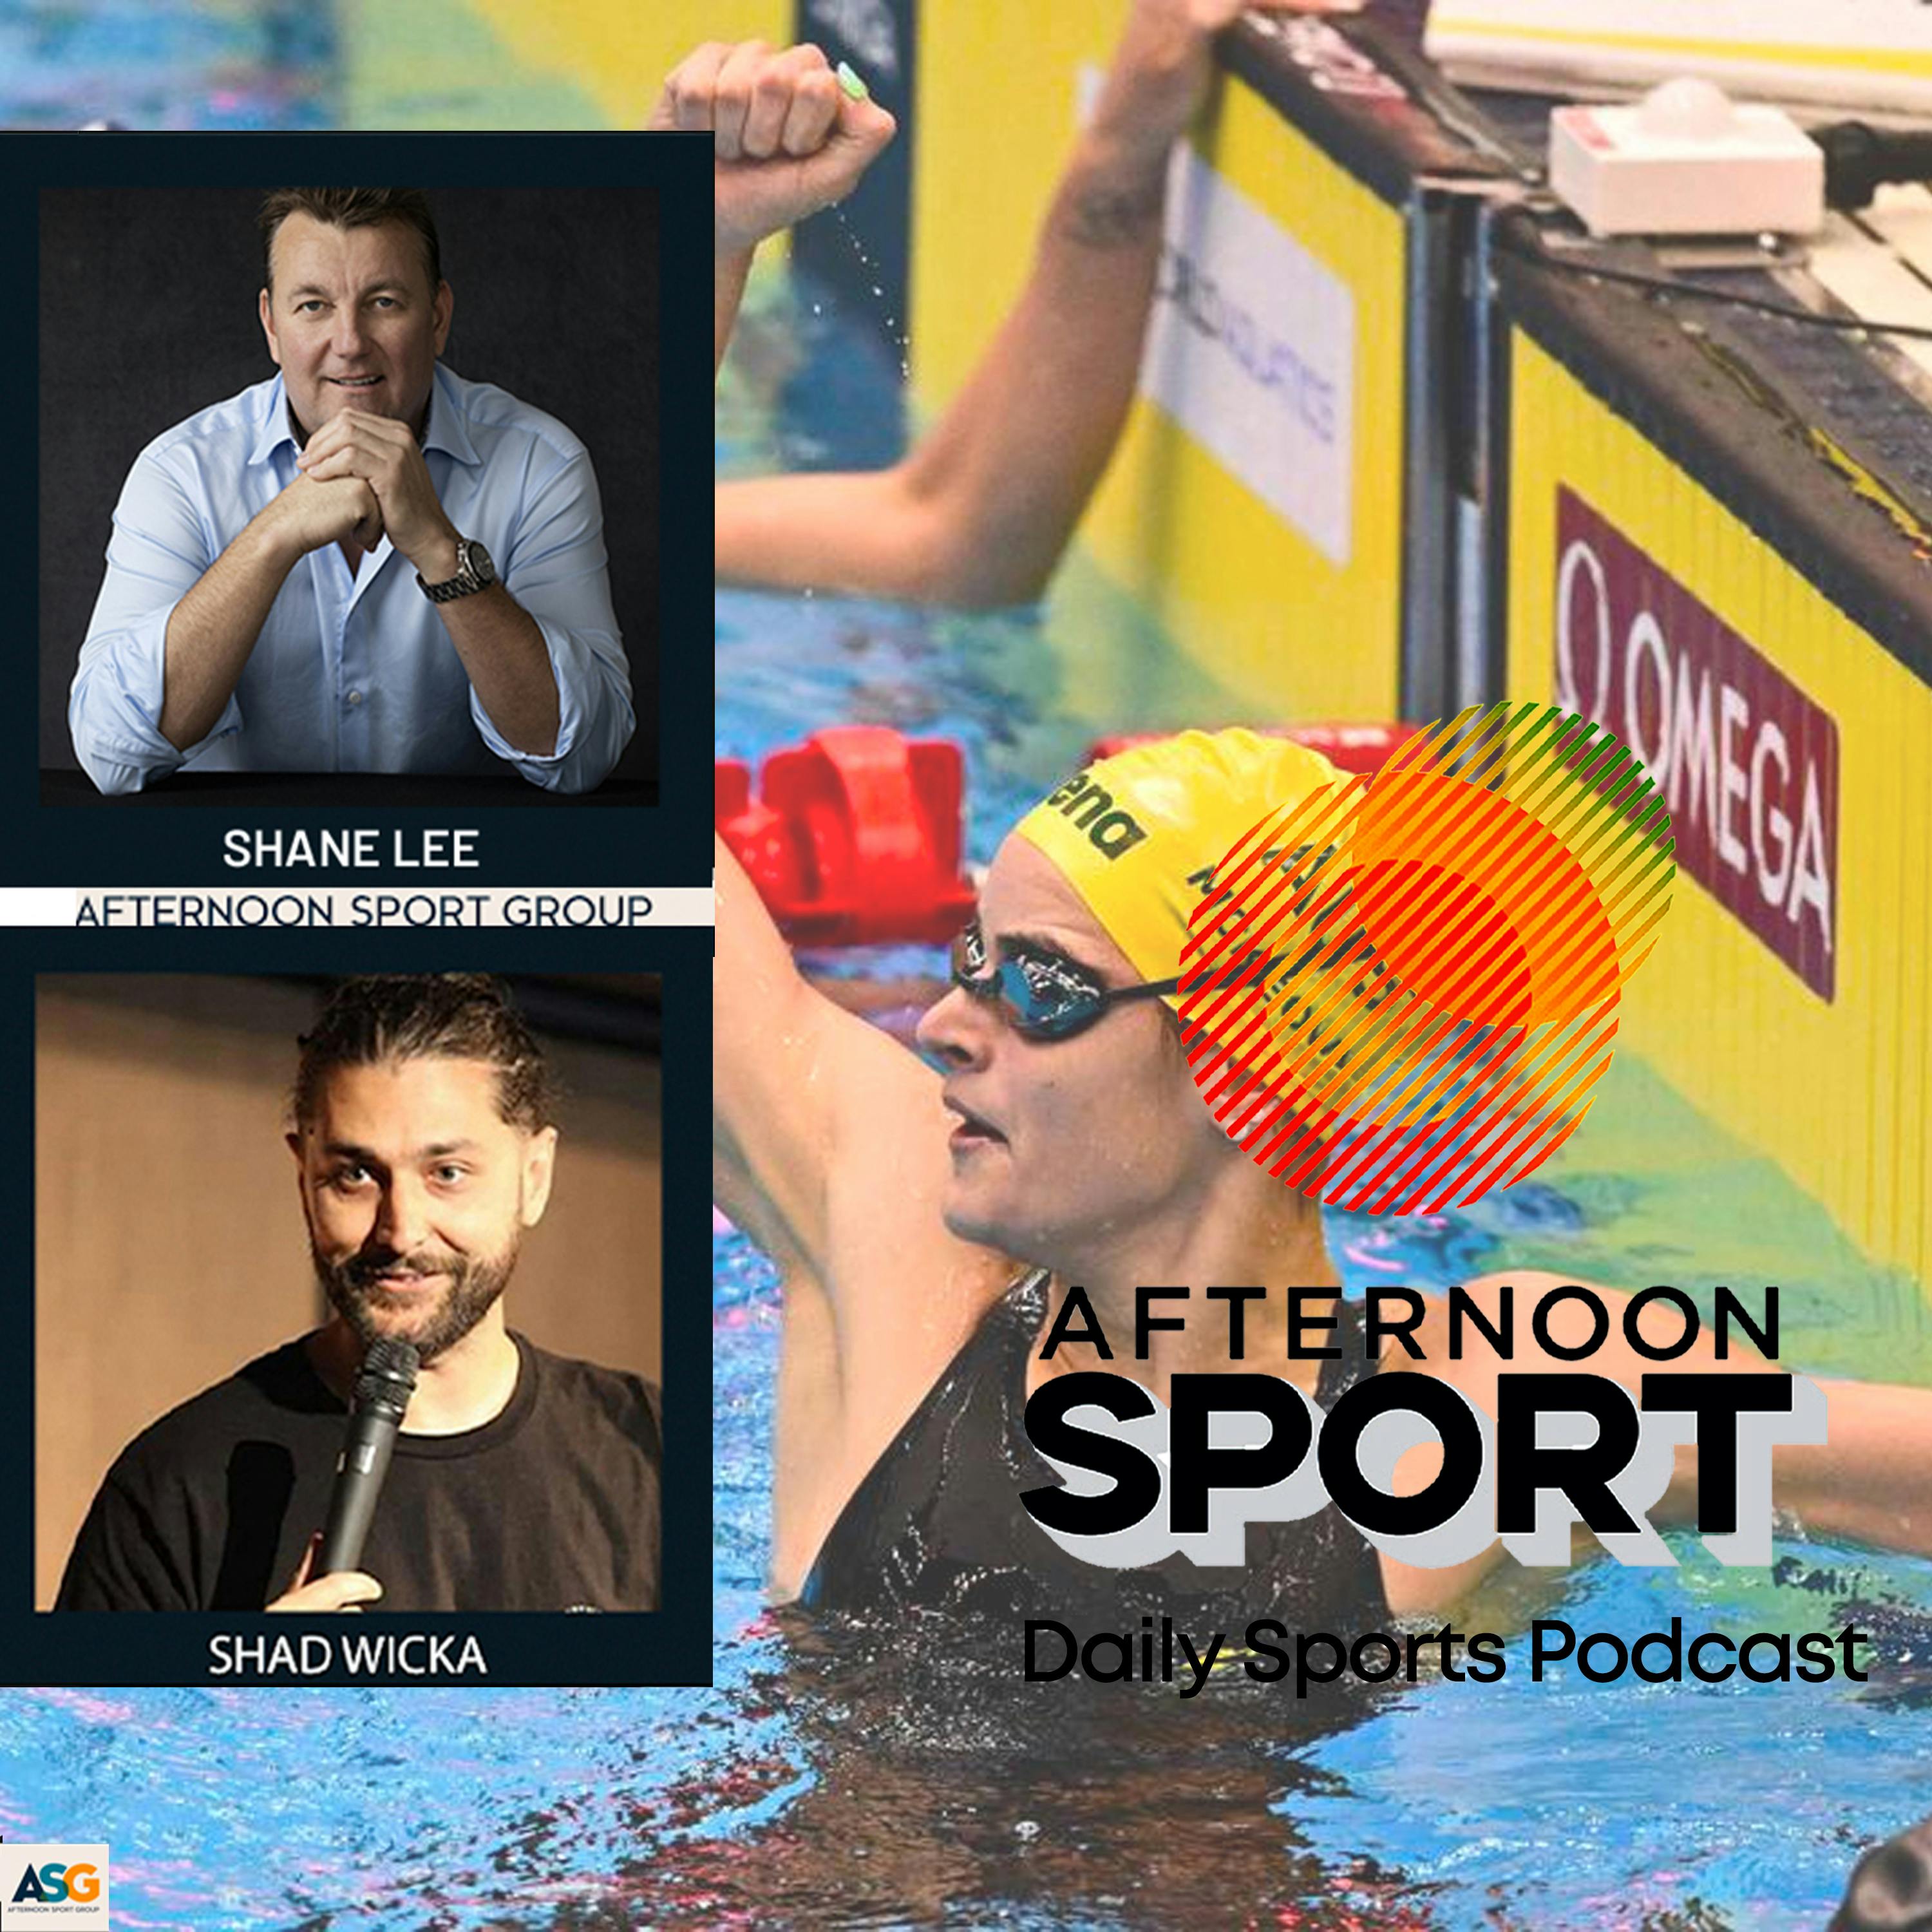 26th July Shane Lee & Shad Wicka: Women’s World Cup, Sam Kerr will play, gold for Kaylee McKeown, Australia coach McDonald is very quiet, NRL media boycott + more!